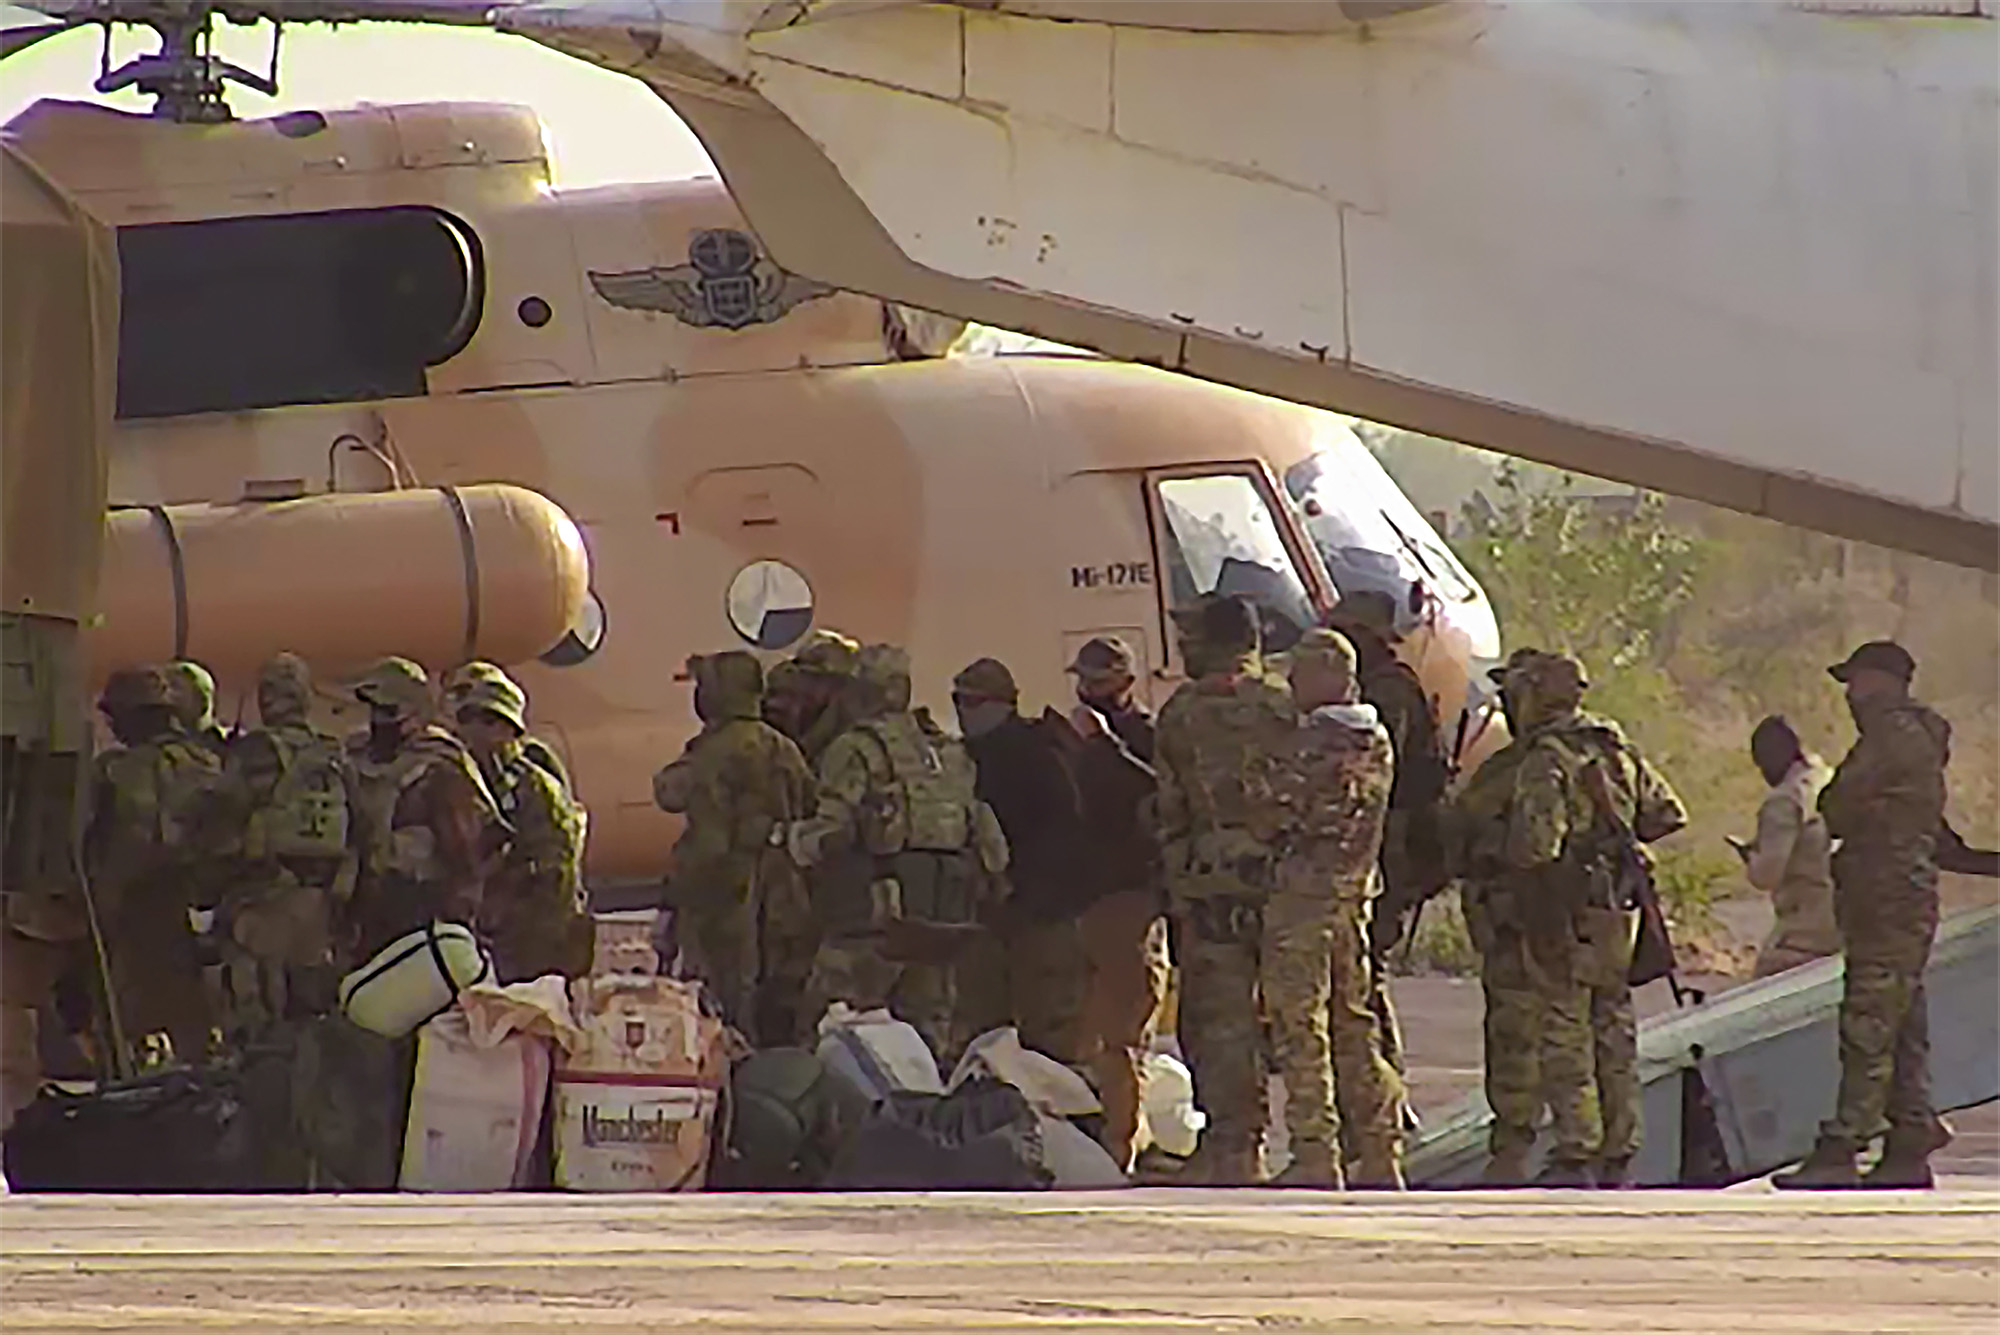 This undated photograph handed out by French military shows Russian mercenaries boarding a helicopter in northern Mali.